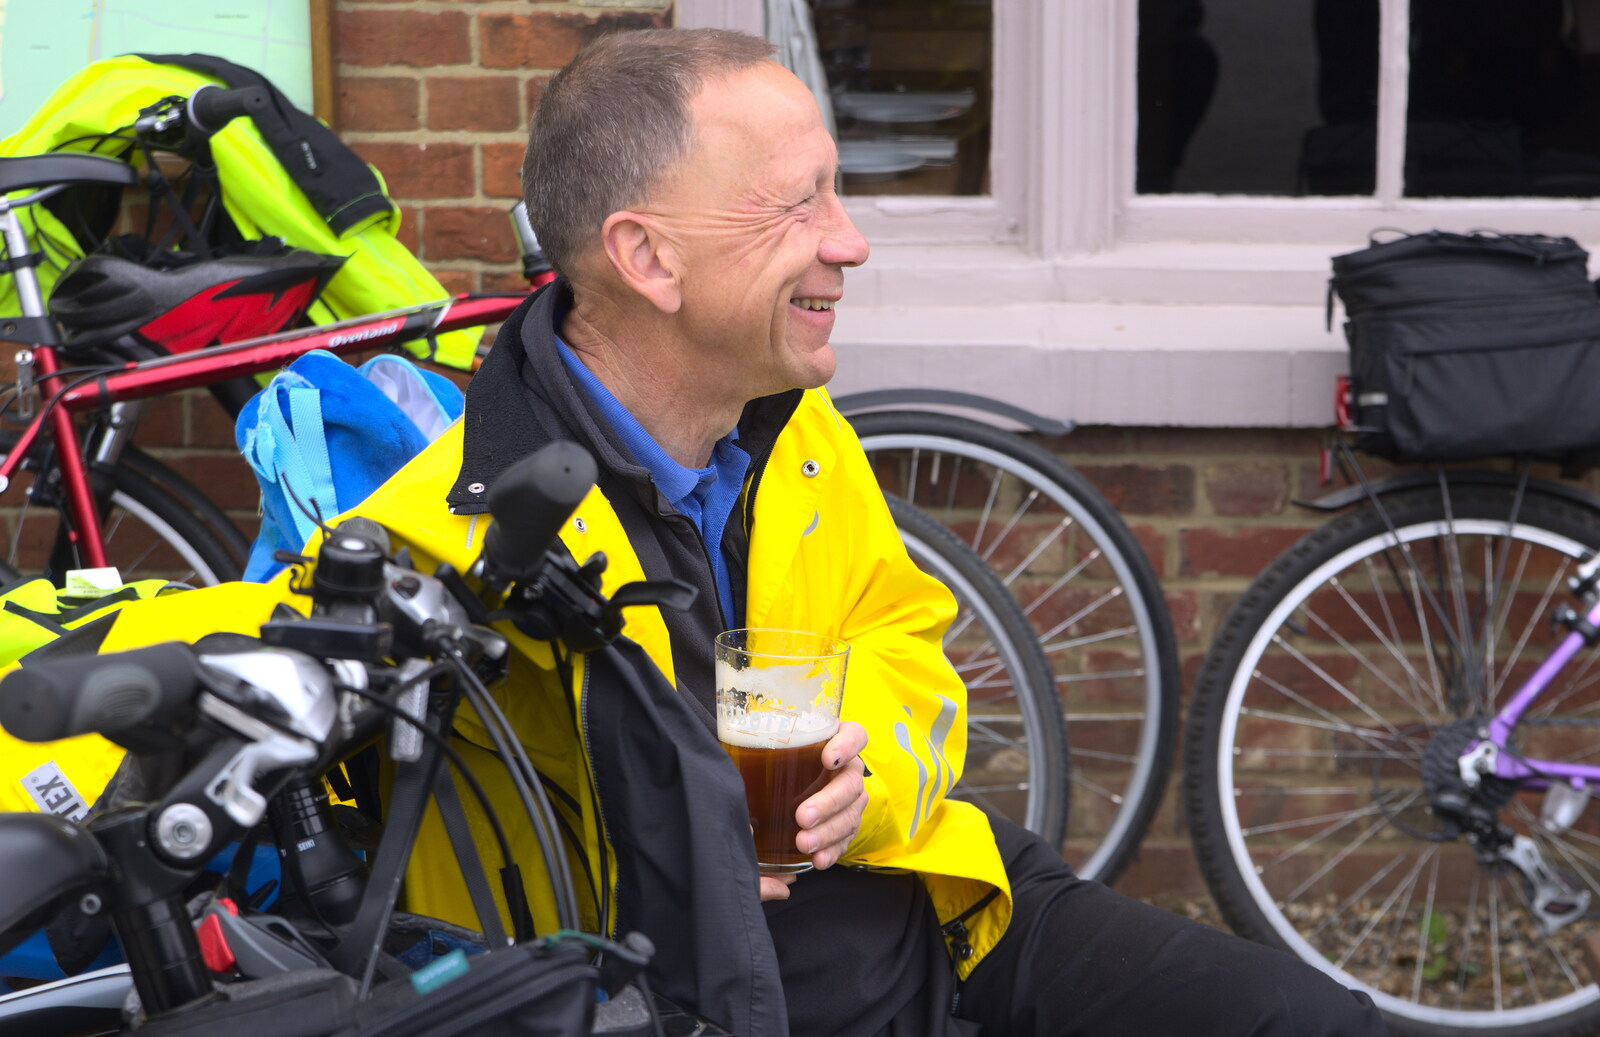 Apple has a beer from The Last-Ever BSCC Weekend Away Bike Ride, Thaxted, Essex - 6th May 2017